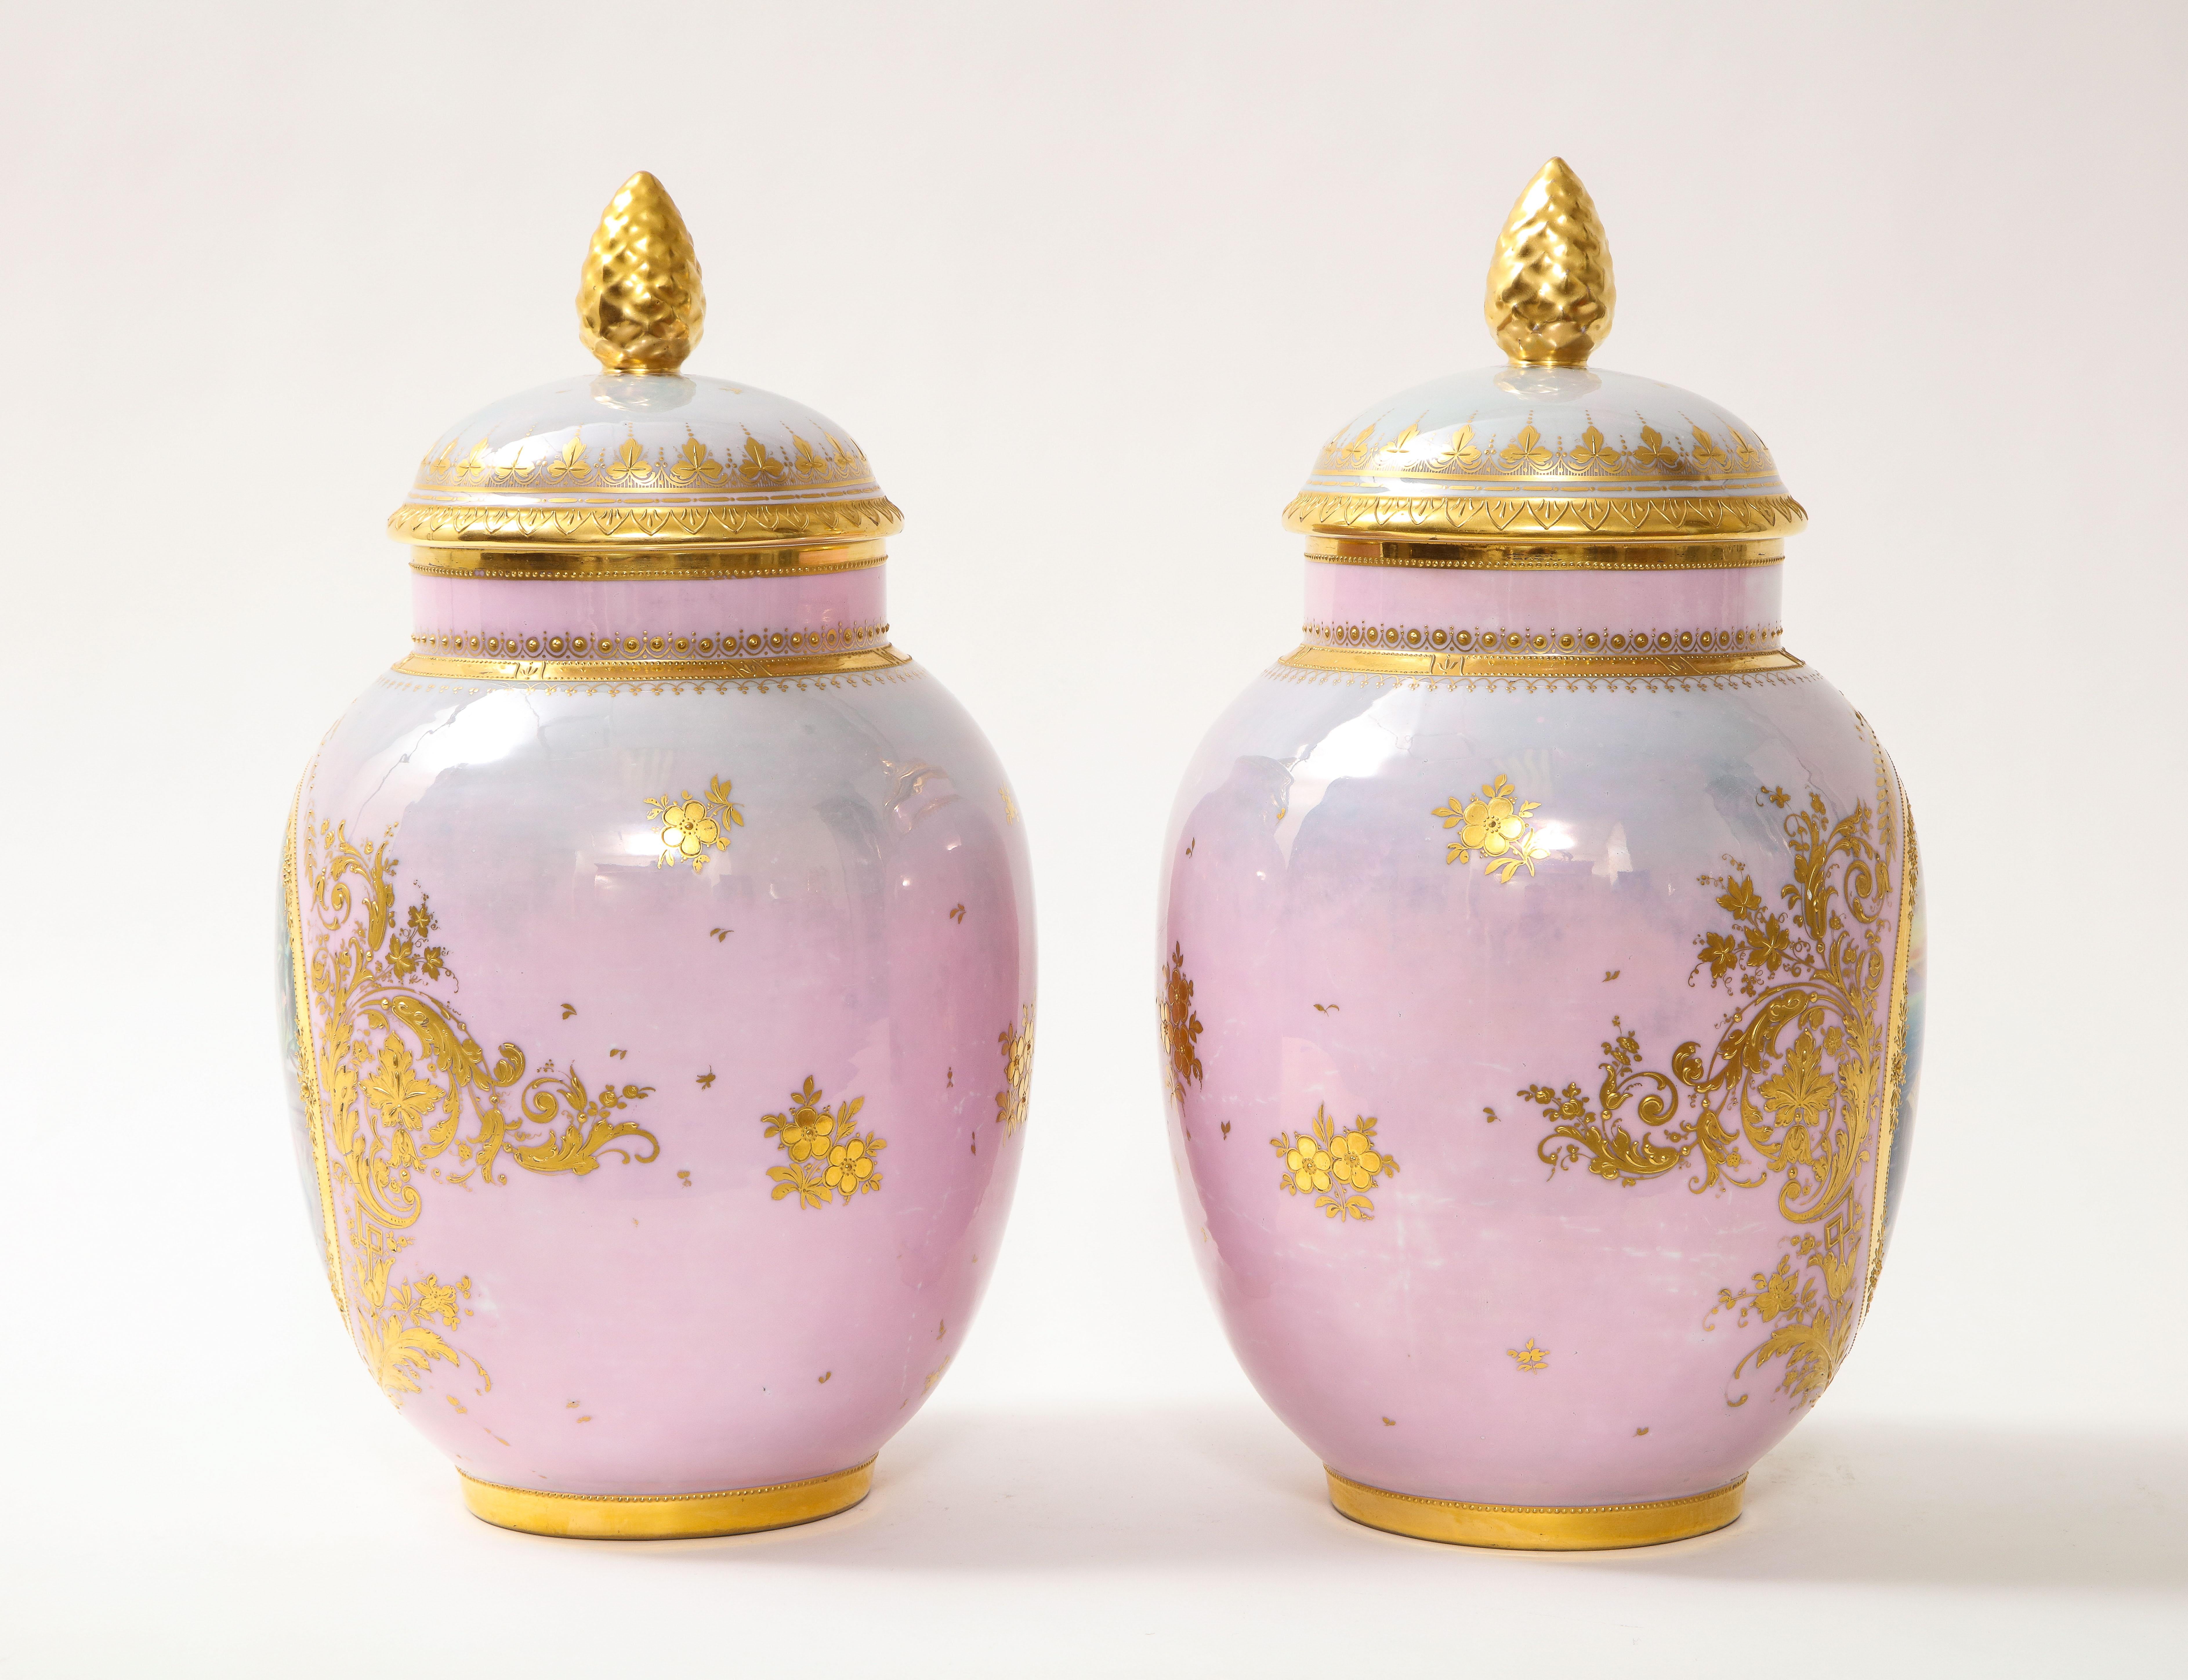 Pair of Royal Vienna Porcelain Iridescent Pink Vases with Neoclassical Scenes For Sale 1